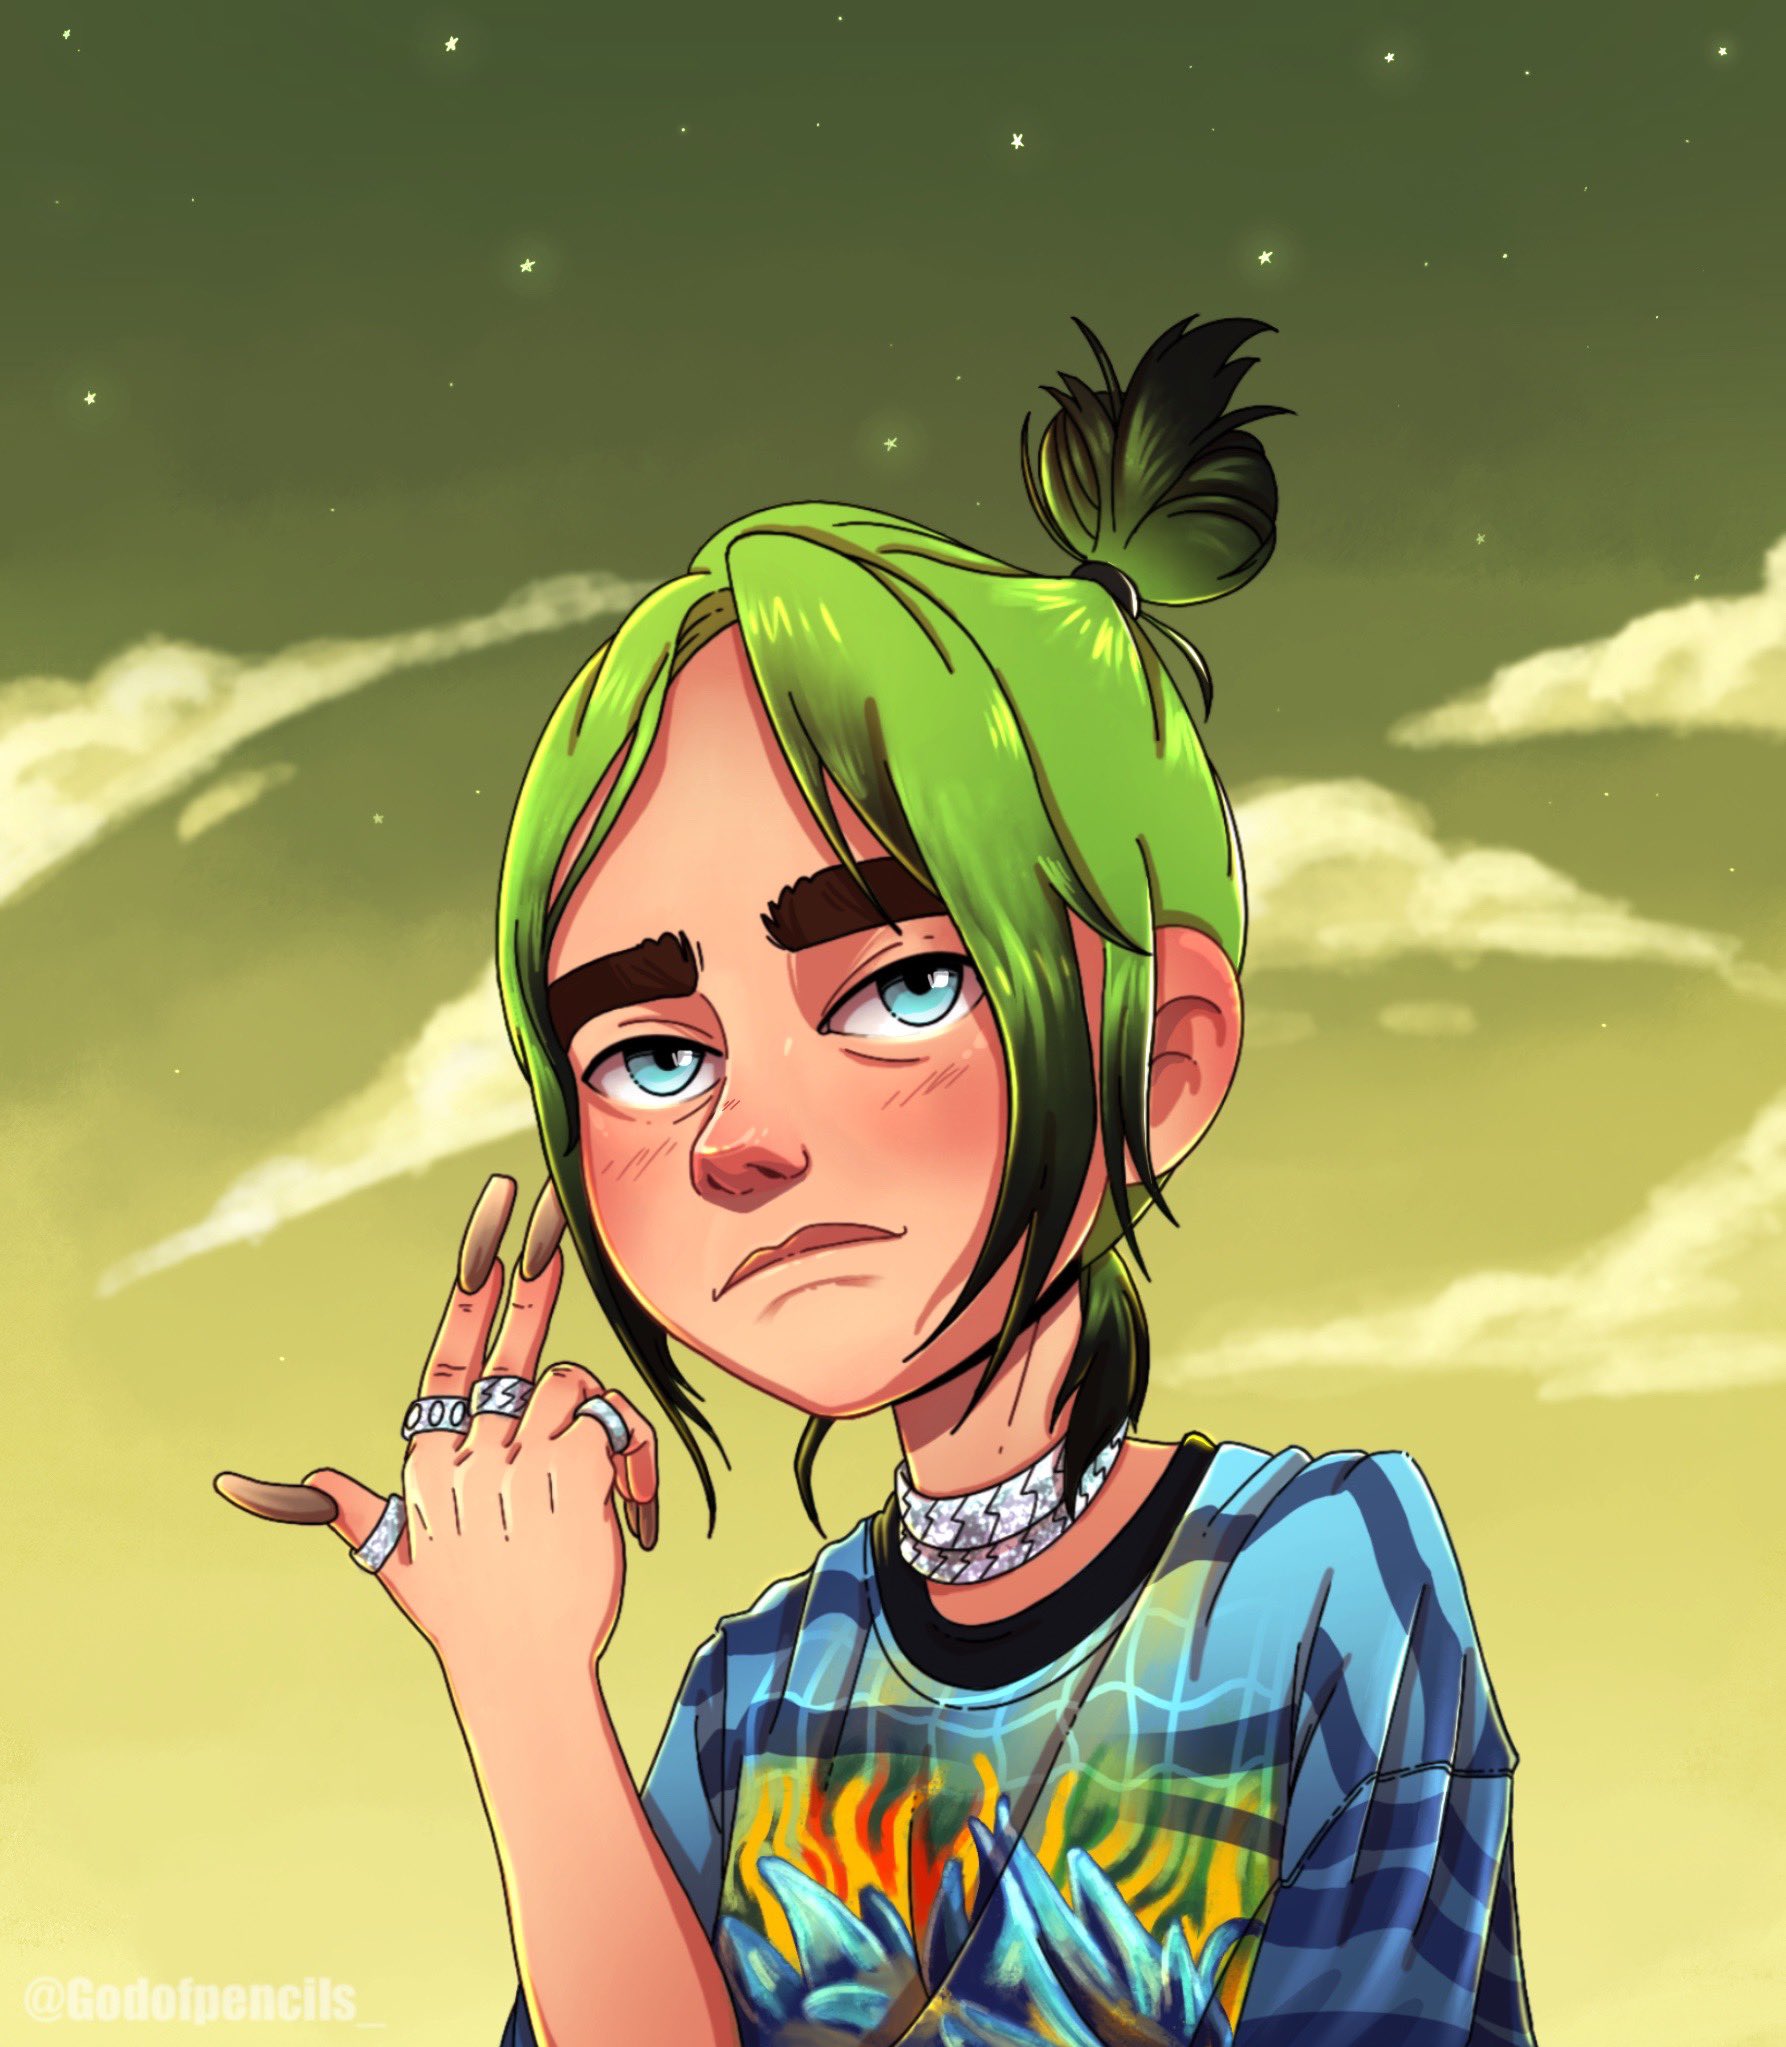 Billie Eilish in anime form and everything you need to hear today